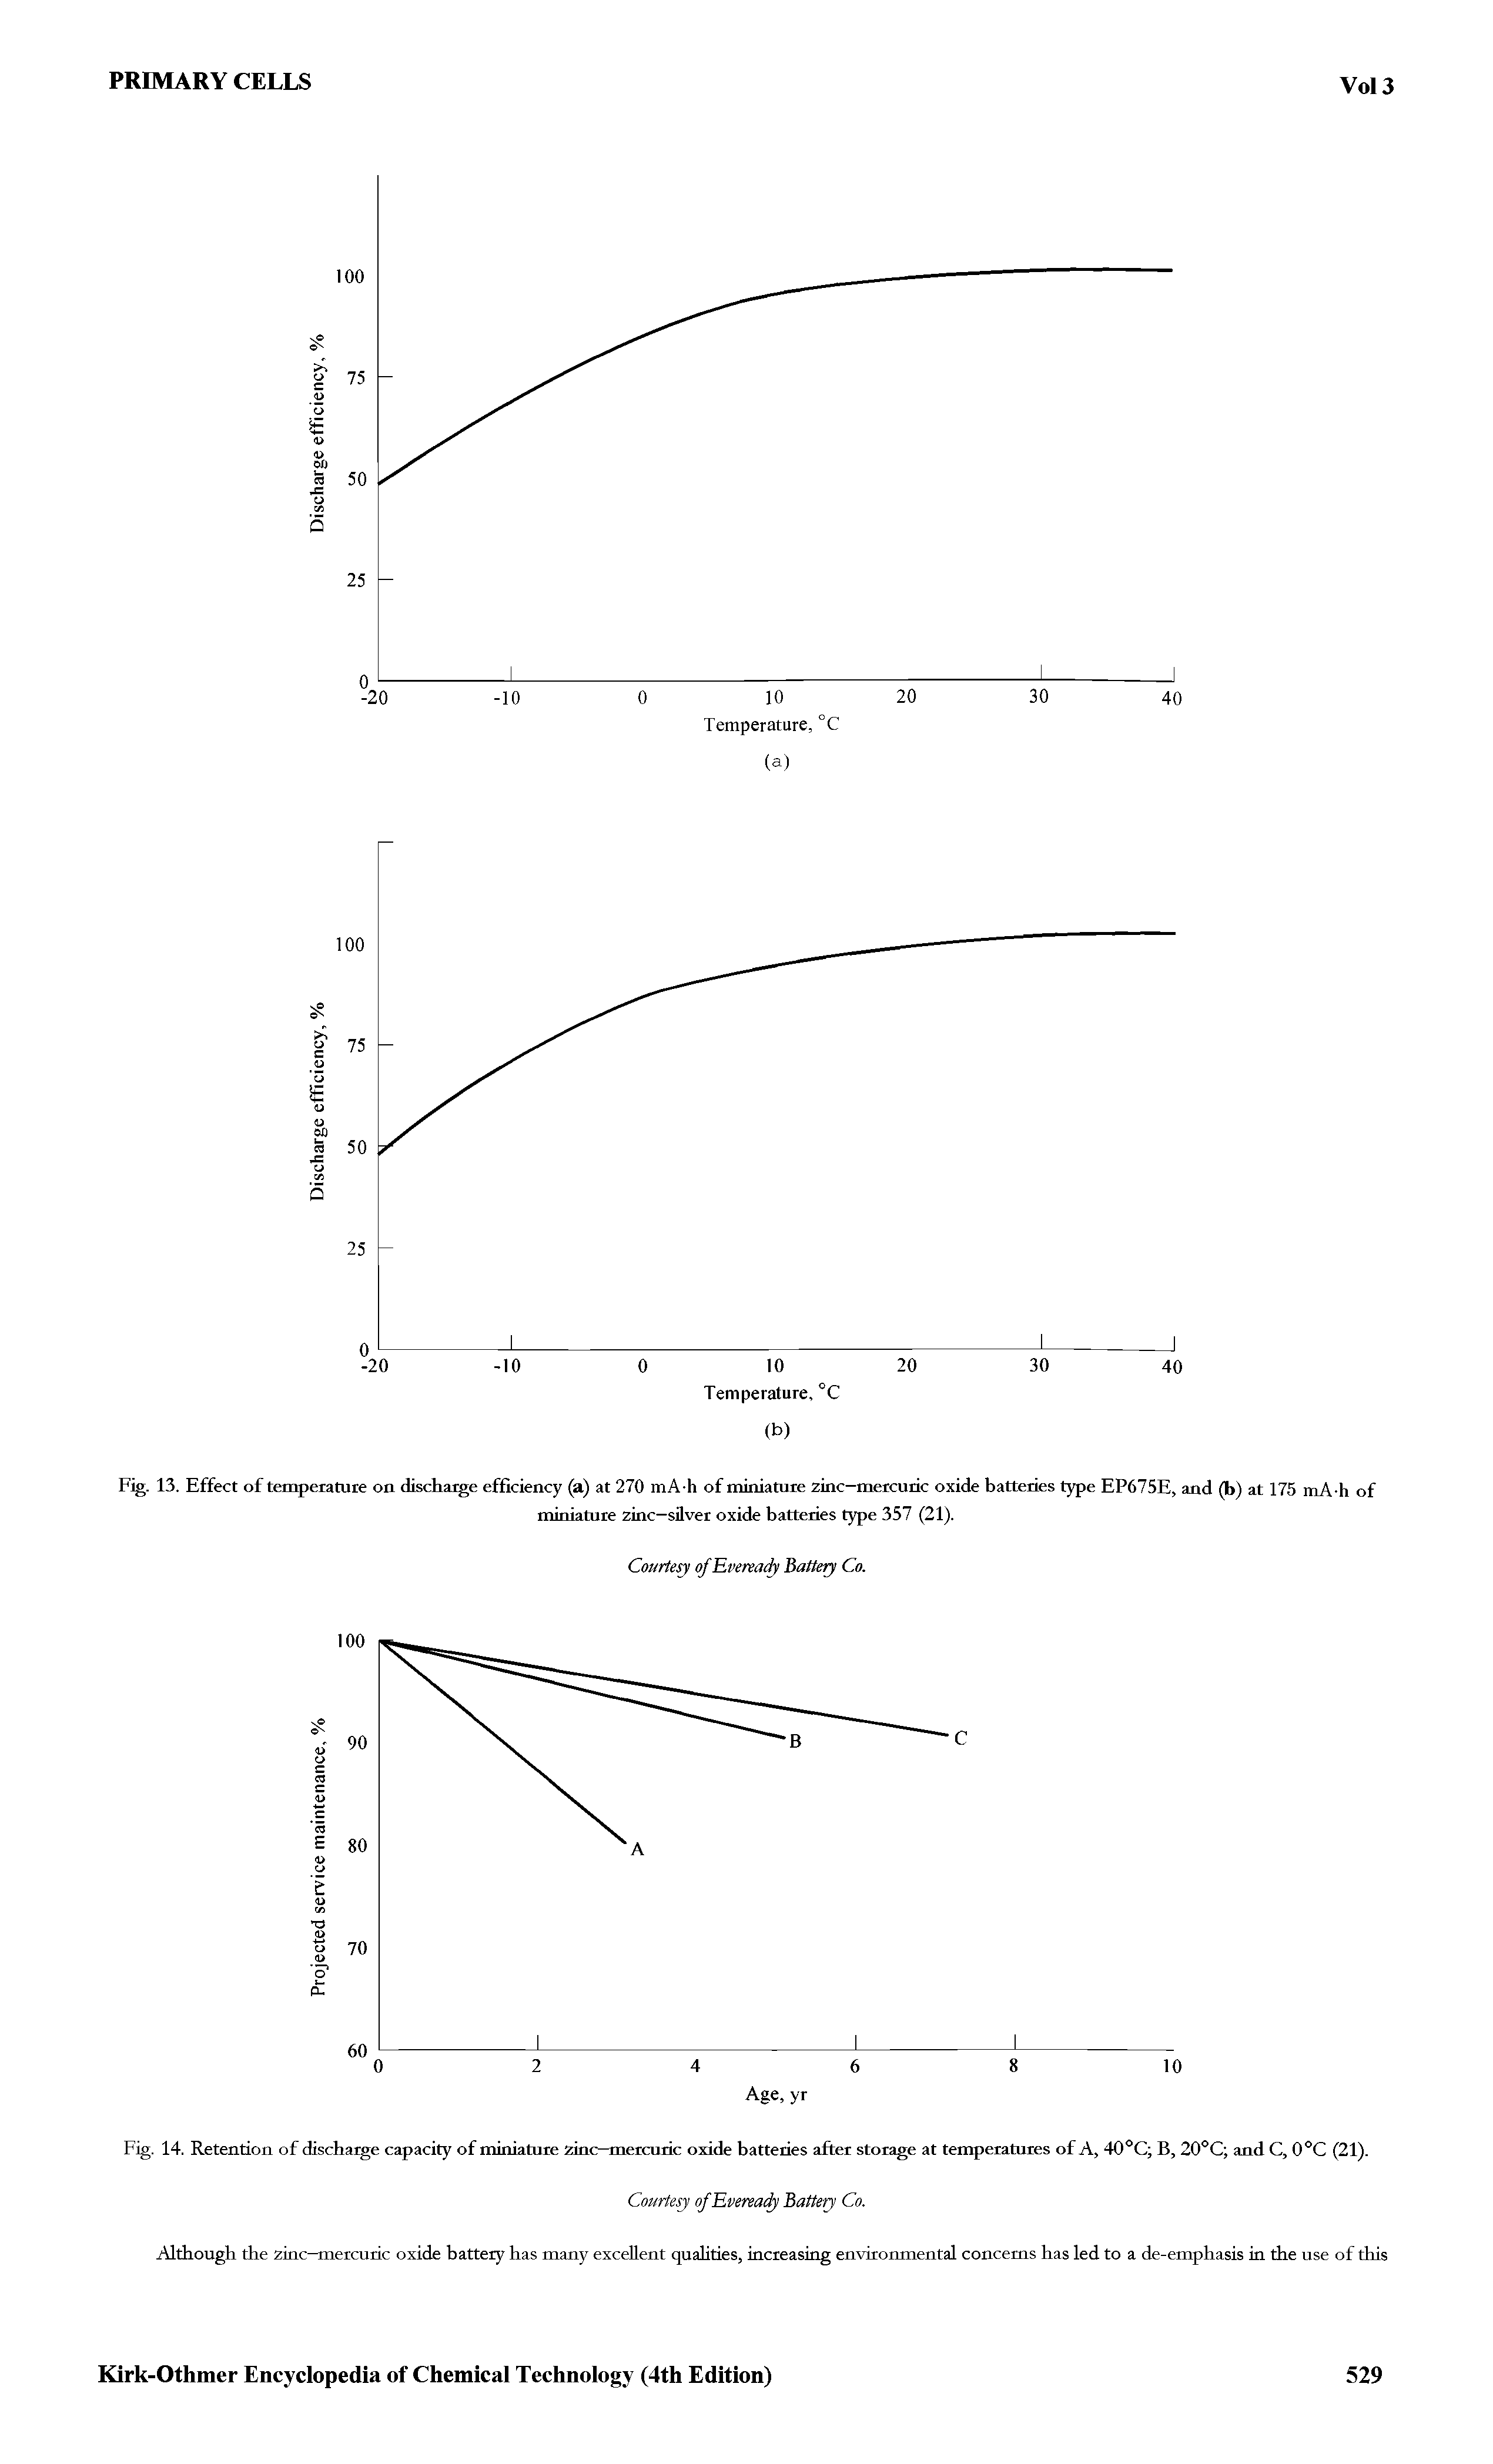 Fig. 14. Retention of discharge capacity of miniature zinc—mercuric oxide batteries after storage at temperatures of A, 40°C B, 20°C and C, 0°C (21).